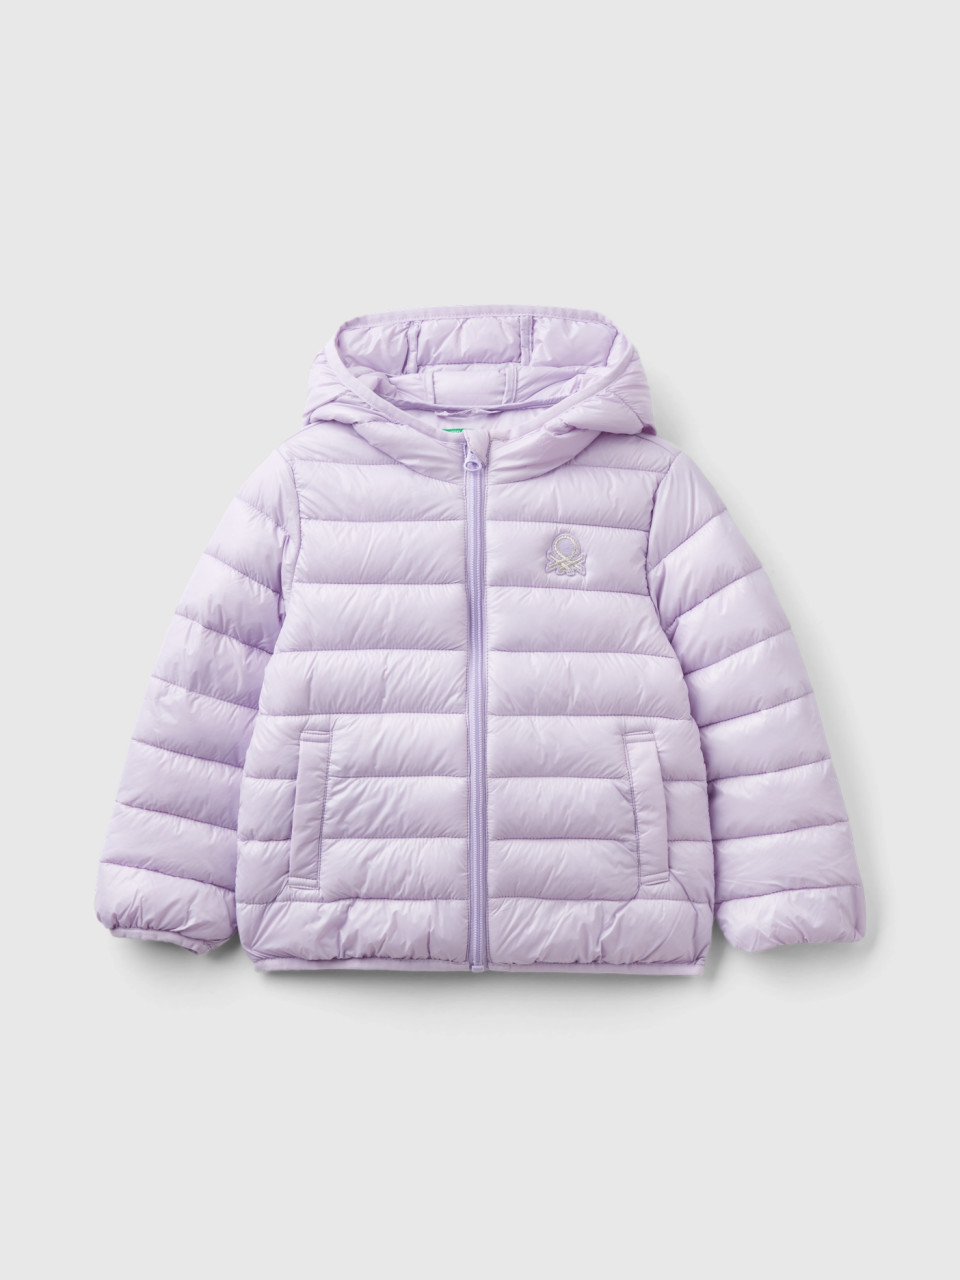 Benetton, Padded Jacket With Hood, Lilac, Kids